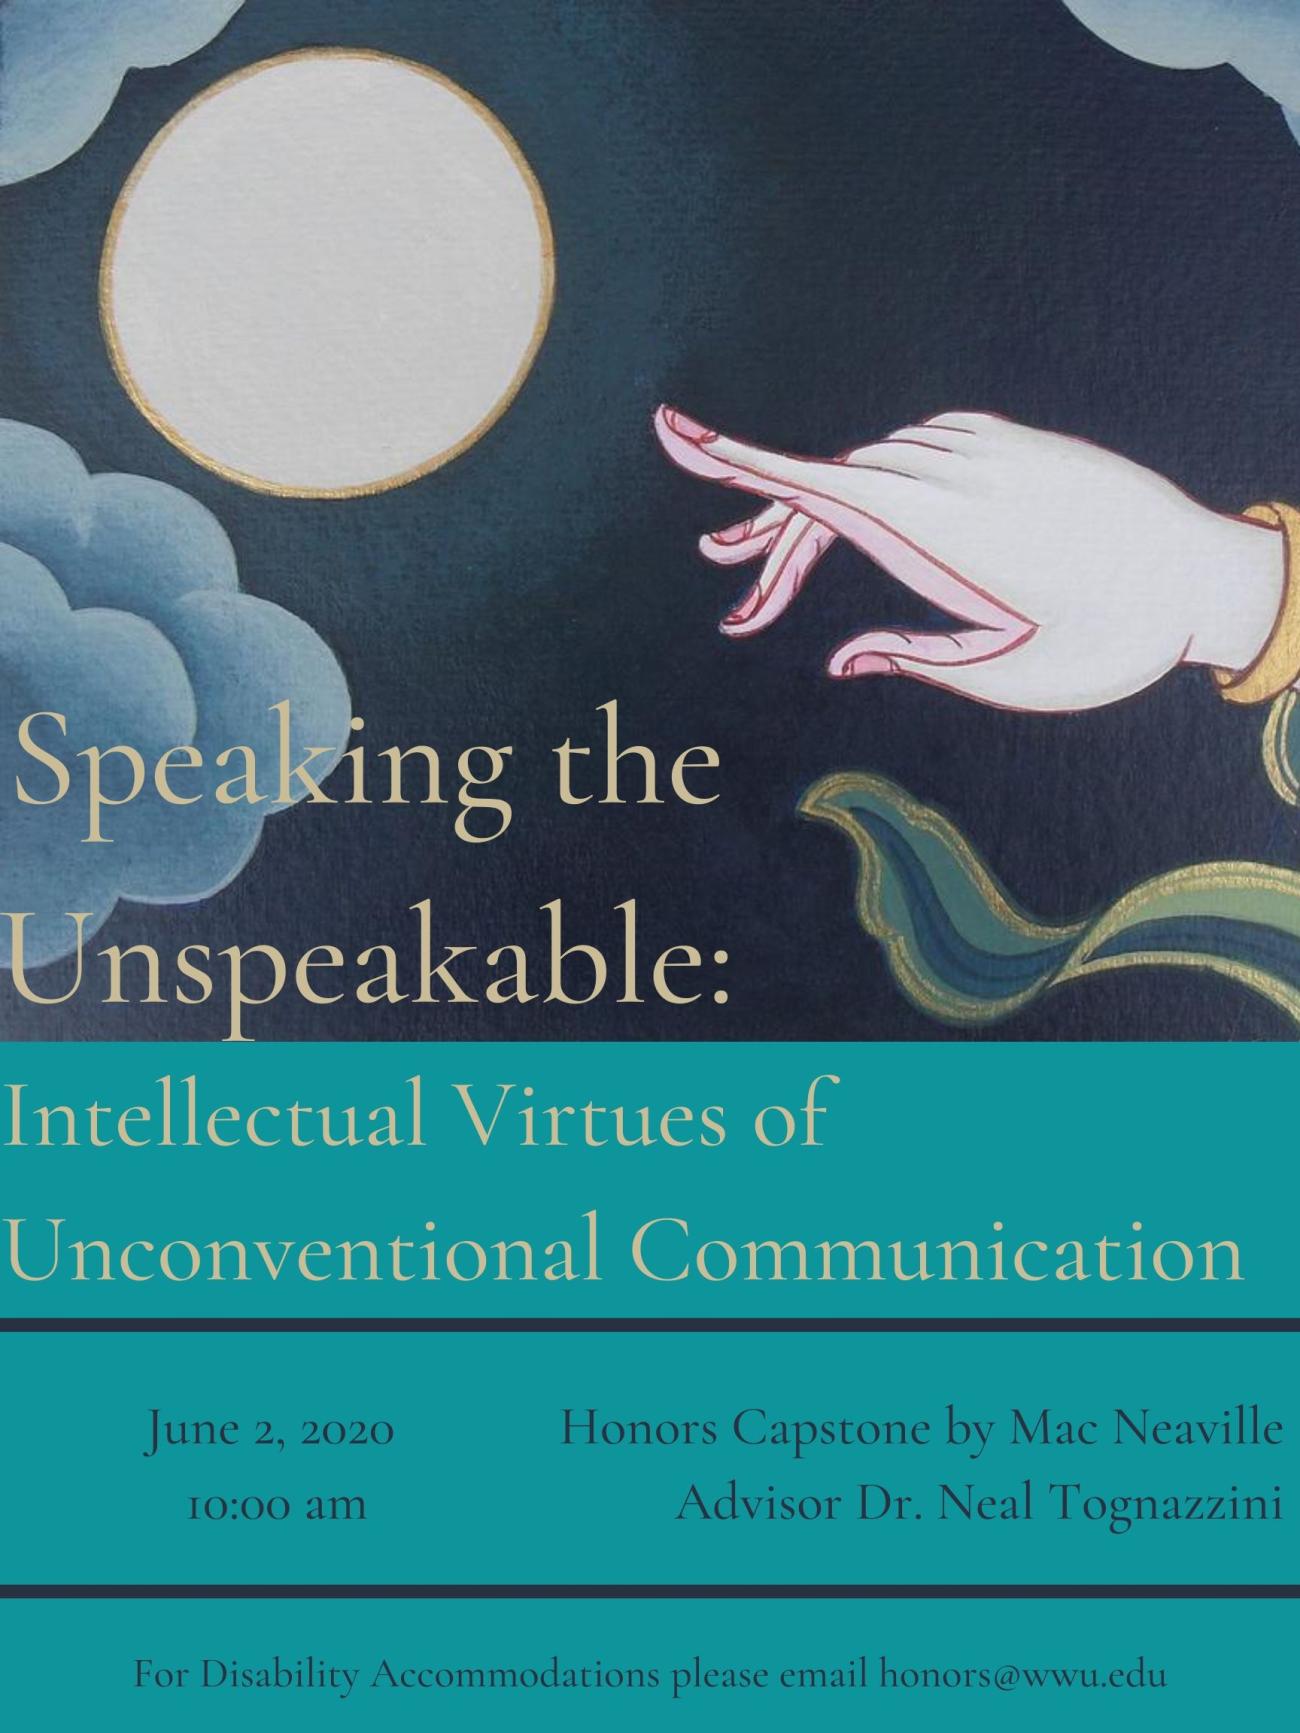 Image: Tibetan Buddhist style painting of an extended finger pointing toward a luminous moon surrounded by clouds. Text: "Speaking the Unspeakable: Intellectual Virtues of Unconventional Communication. June 2, 2020. 10:00 am. Honors Capstone by Mac Neaville. Advisor Dr. Neal Tognazzini. For disability accomodations please email honors@wwu.edu."